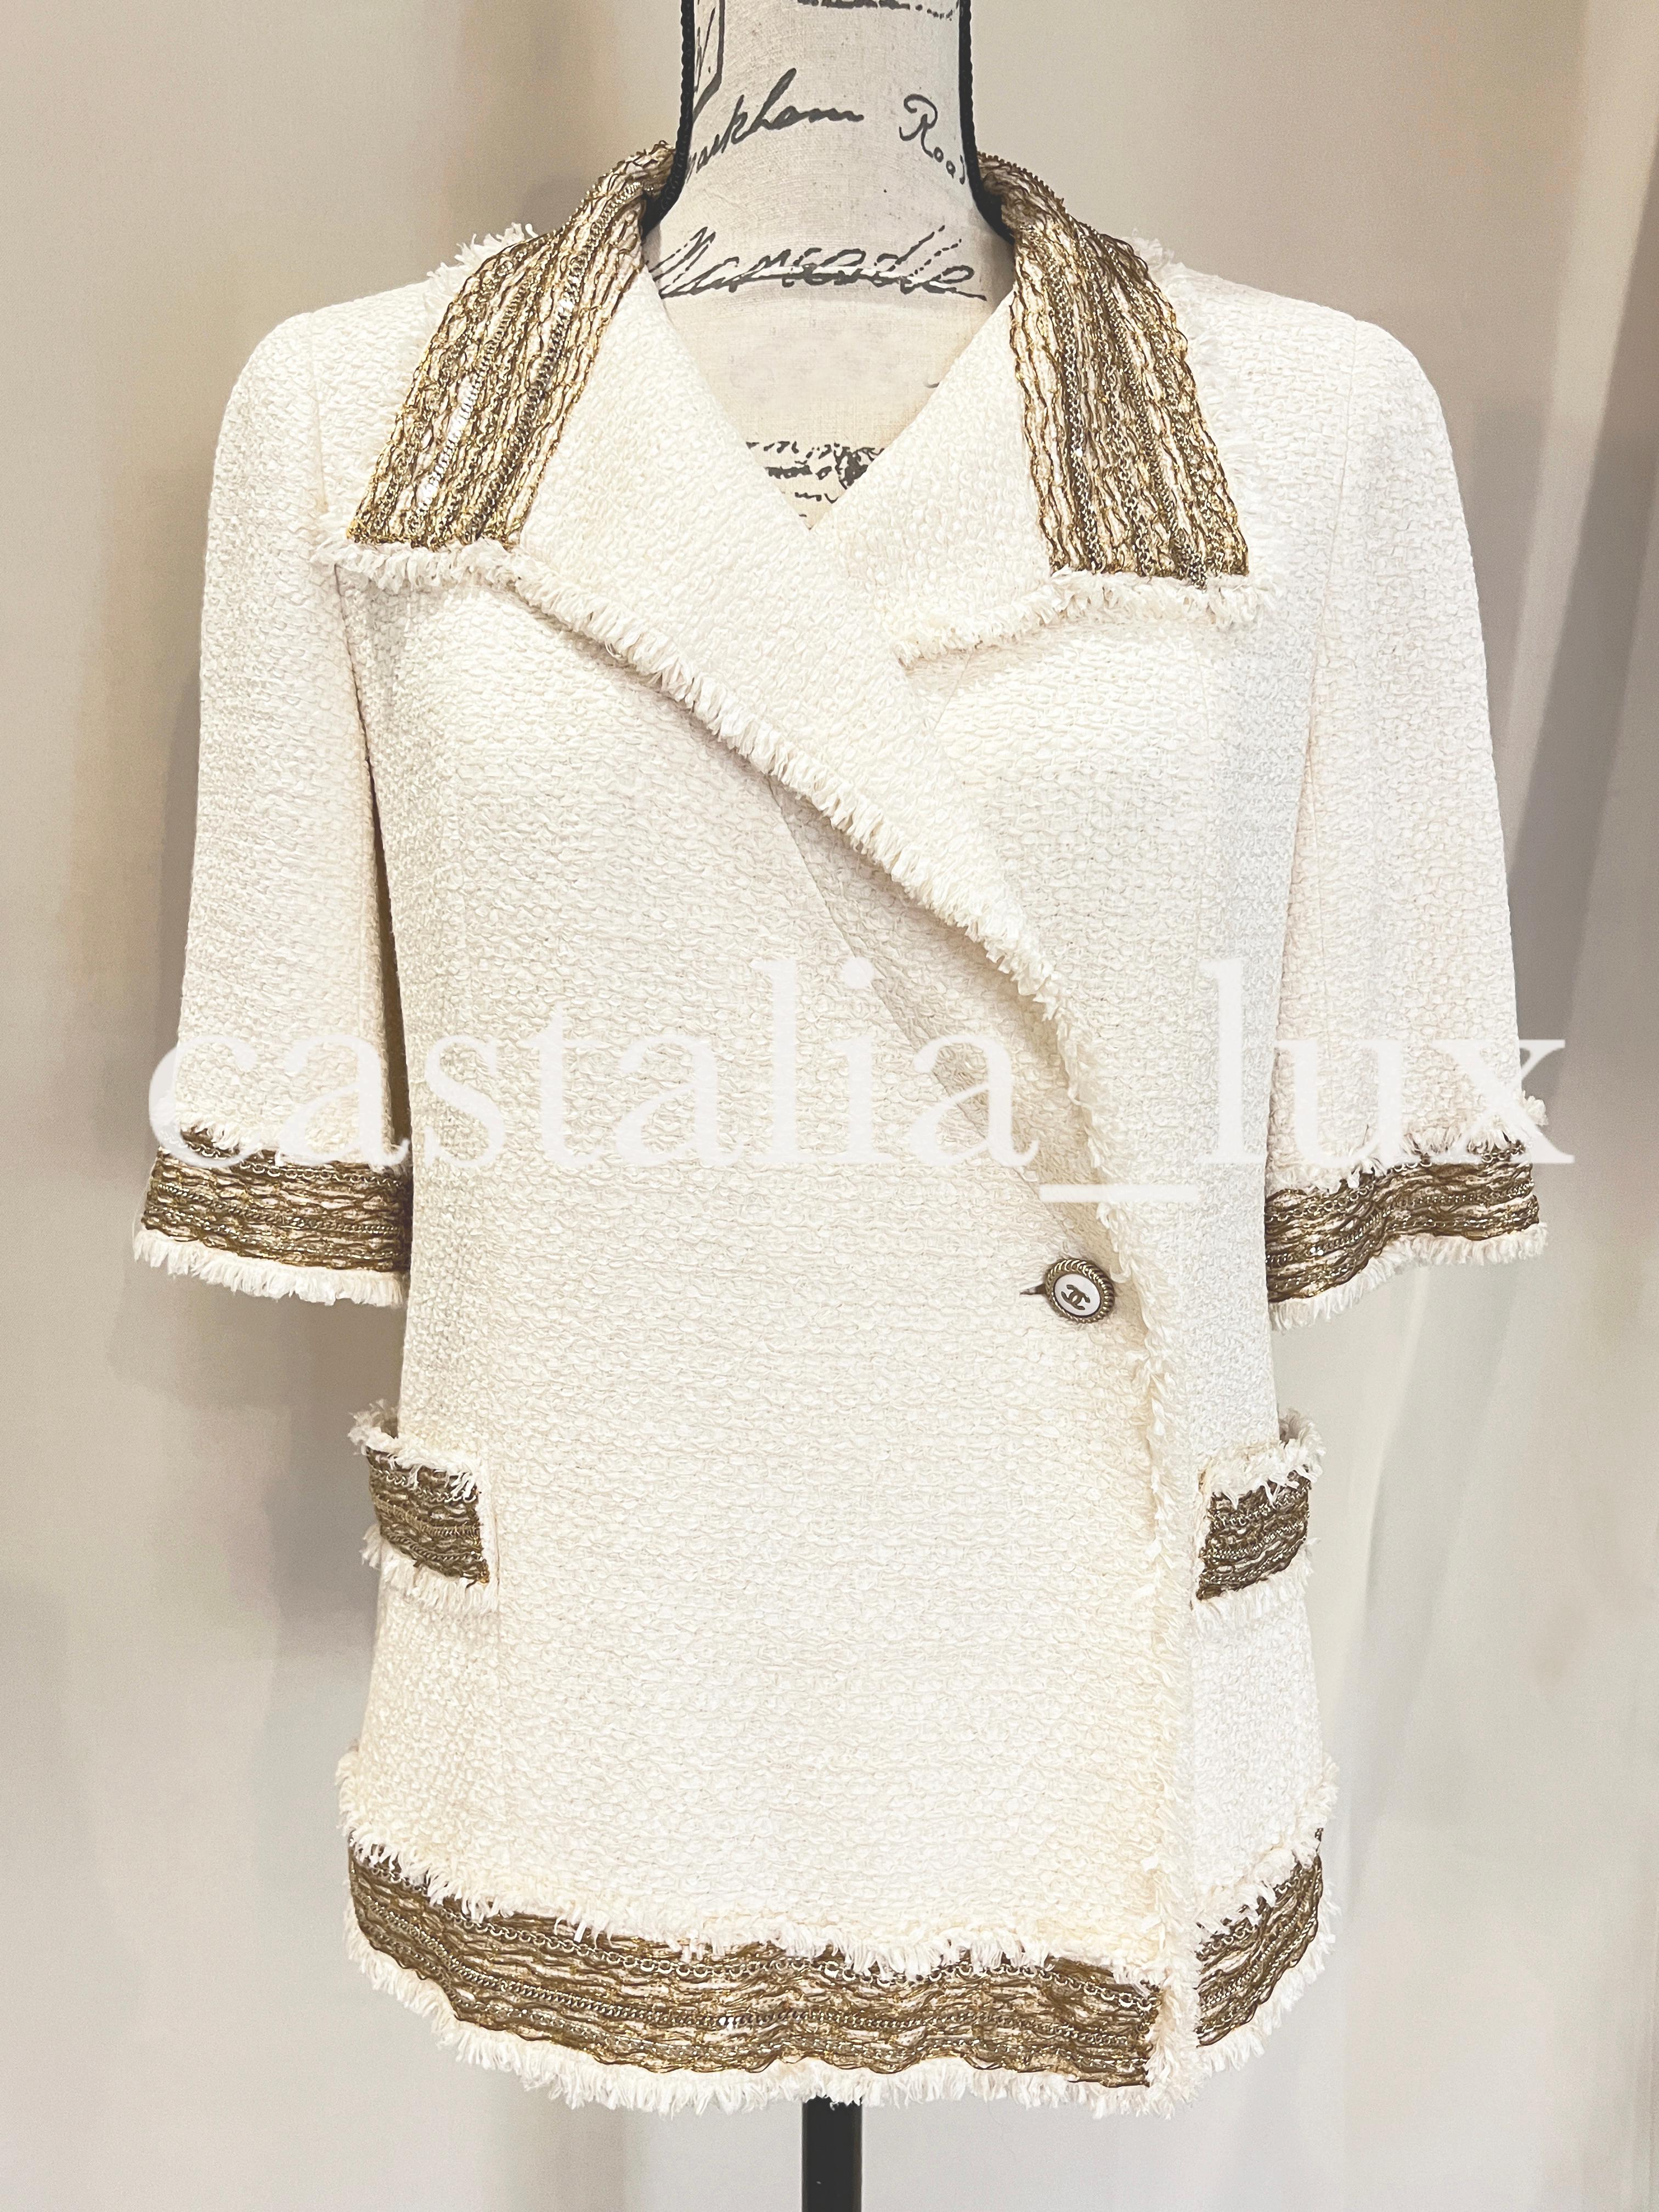 Chanel New Super Rare Chain Embellished Tweed Jacket 11